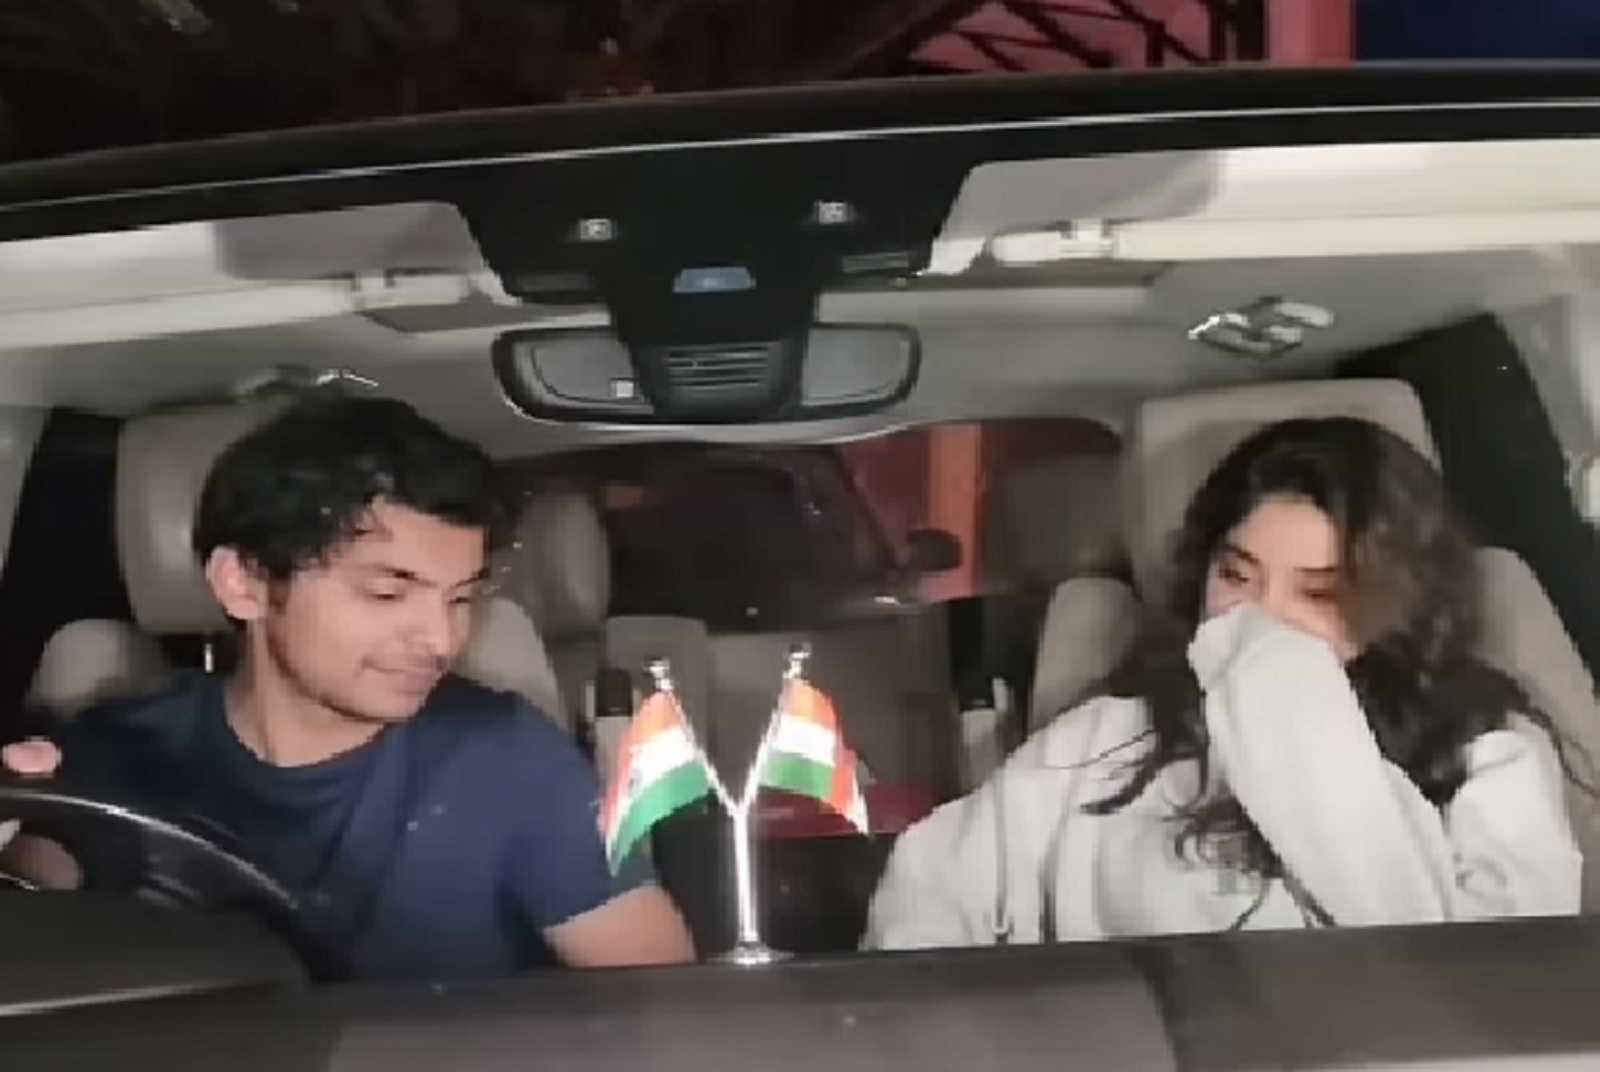 Janhvi Kapoor spotted in car with rumoured BF Shikhar Pahariya, netizens raise concern 'Why don't we give privacy to actors'